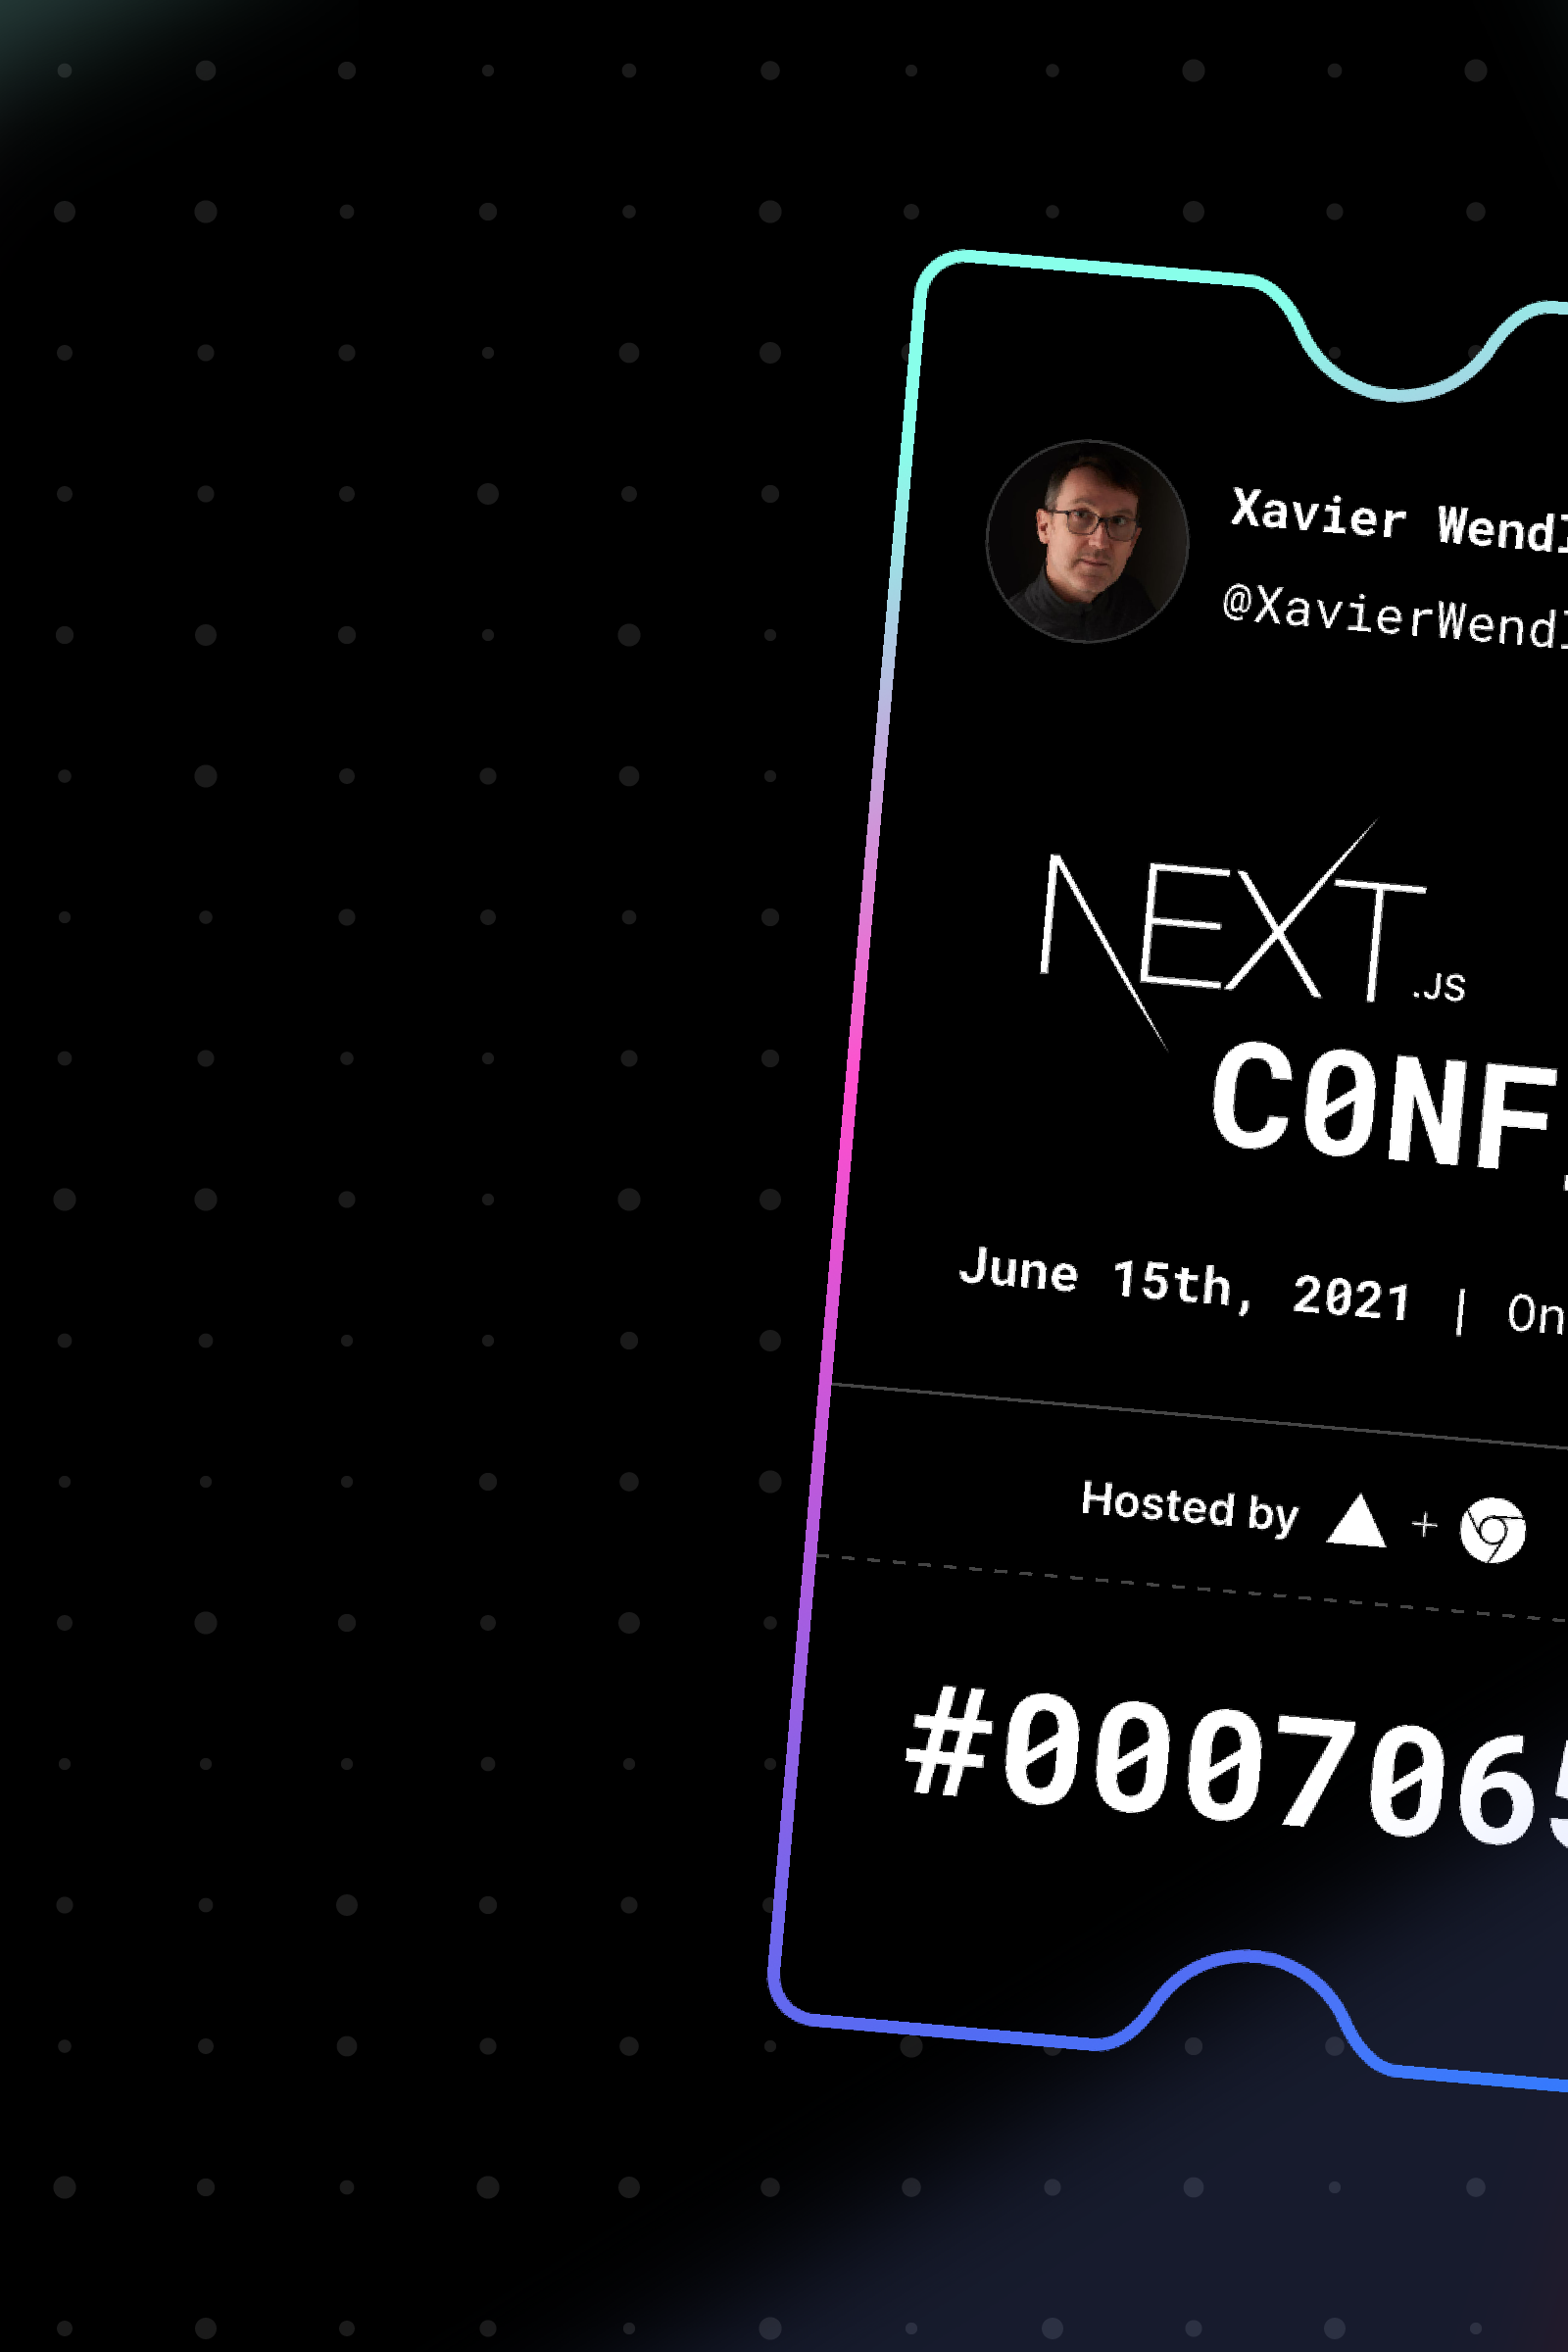 Xavier Wendling's ticket to the second Next.js Conf